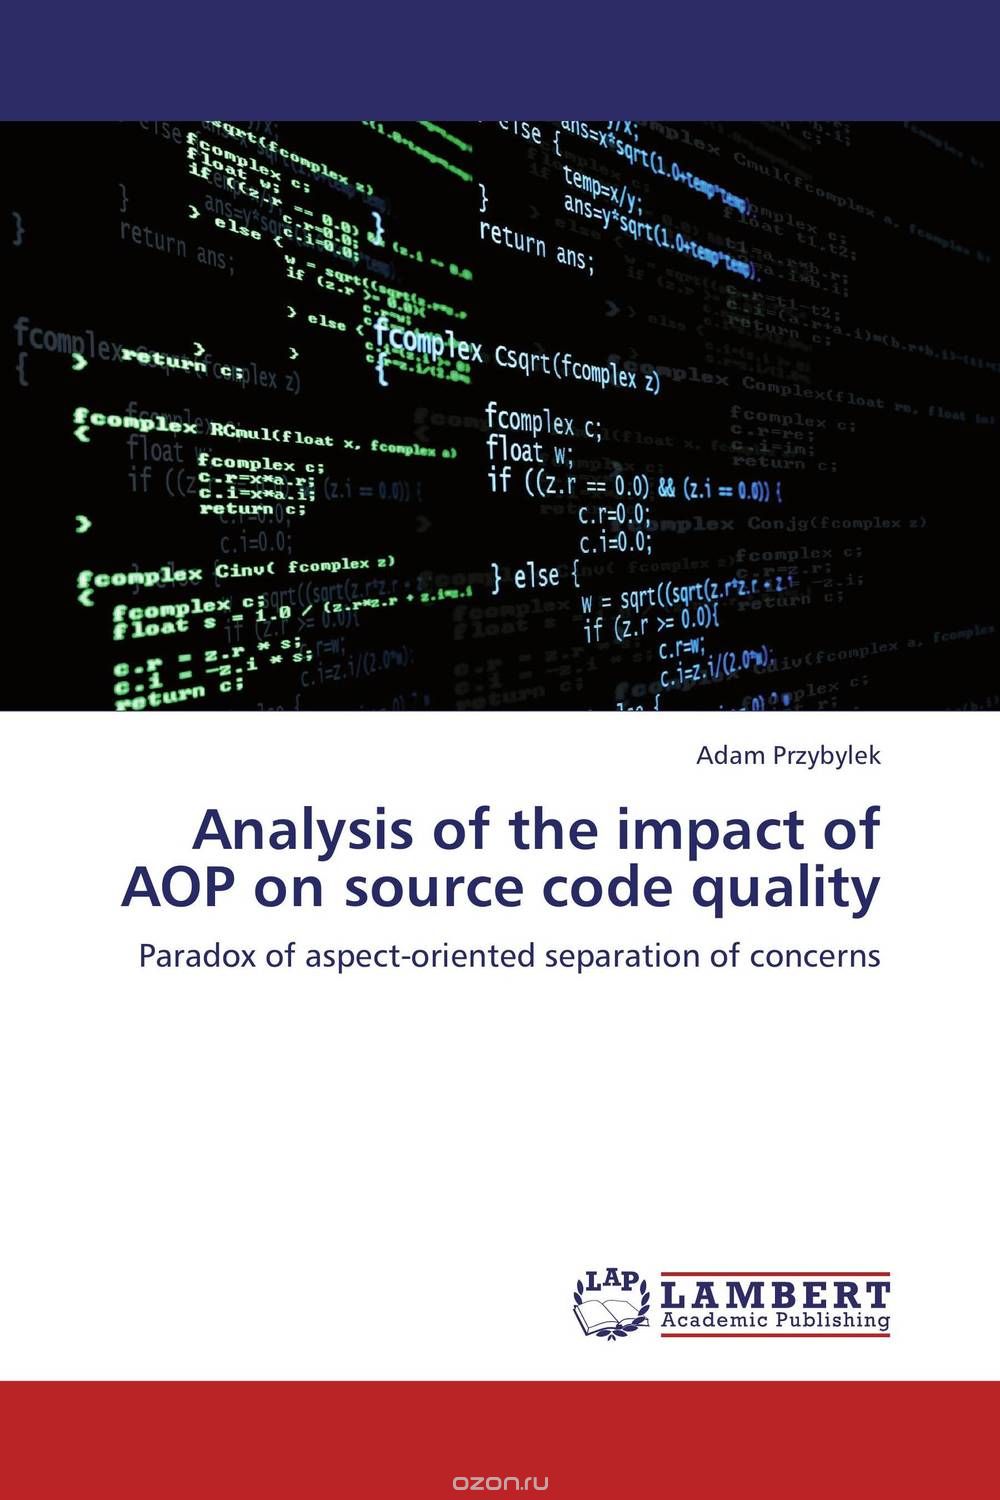 Analysis of the impact of AOP on source code quality